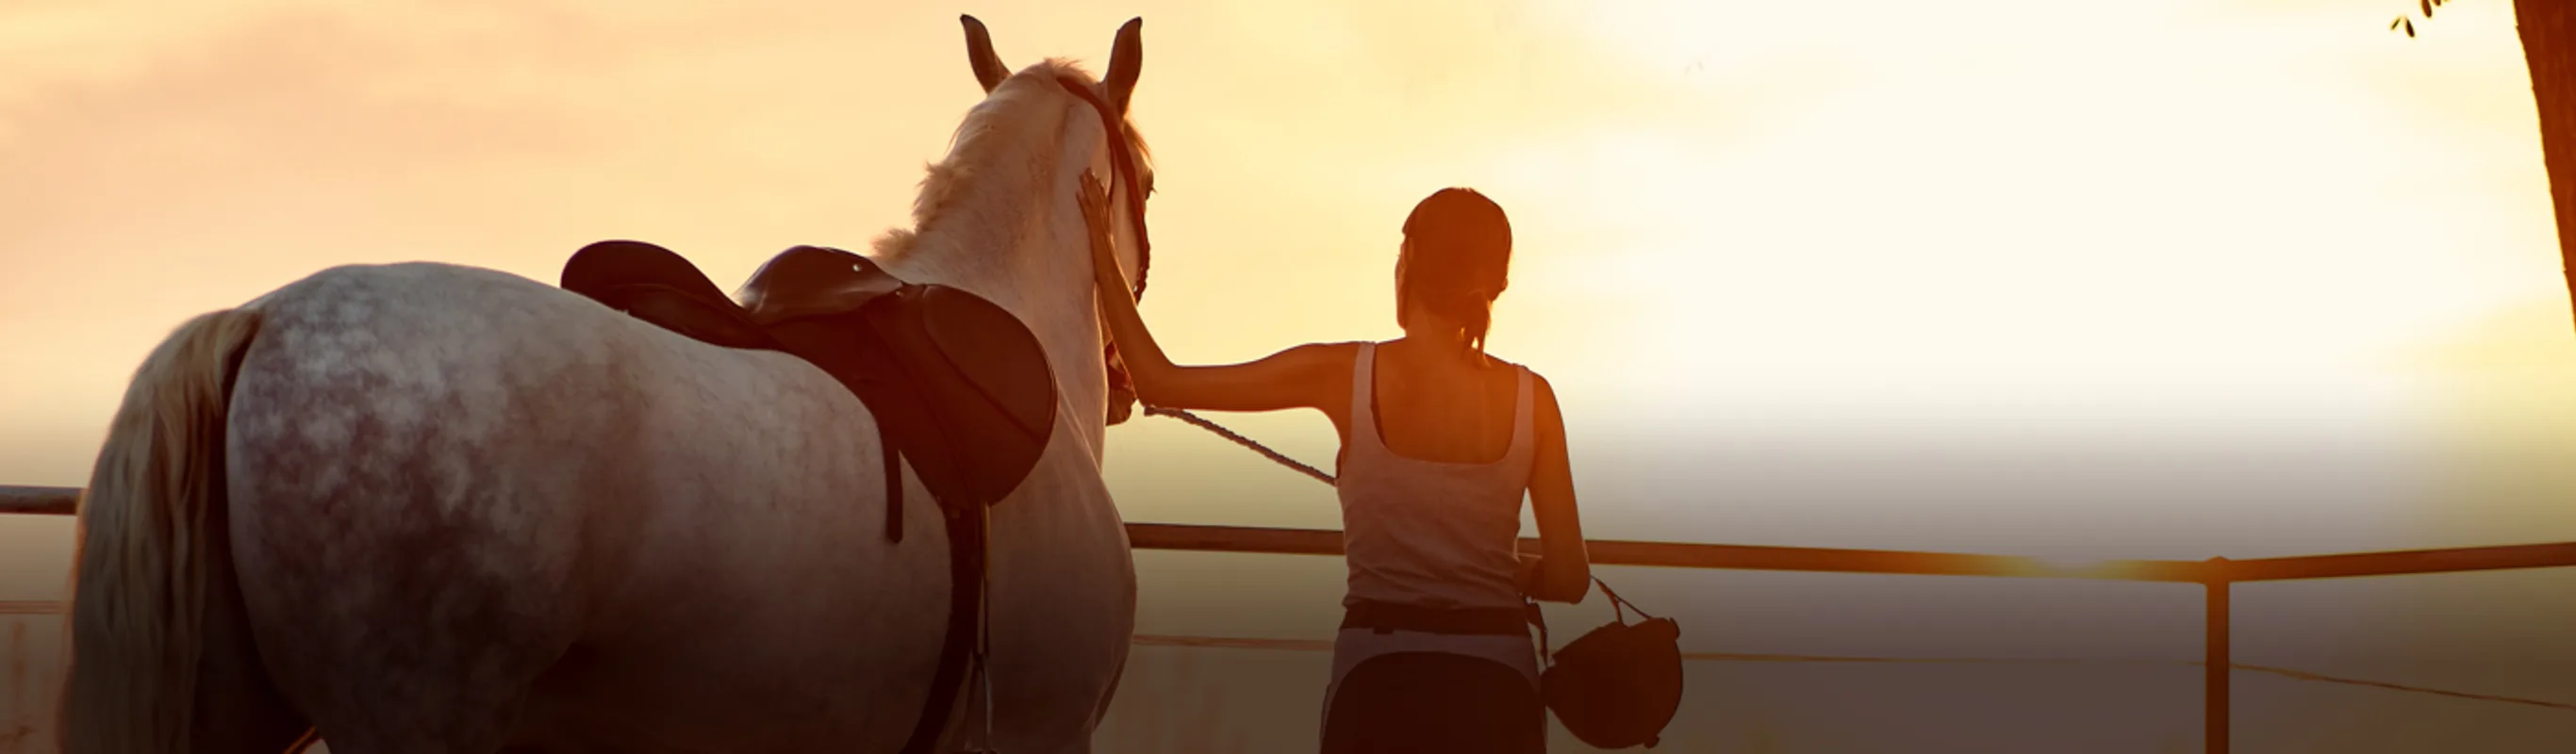 A woman standing outside next to a white horse looking into the sunset